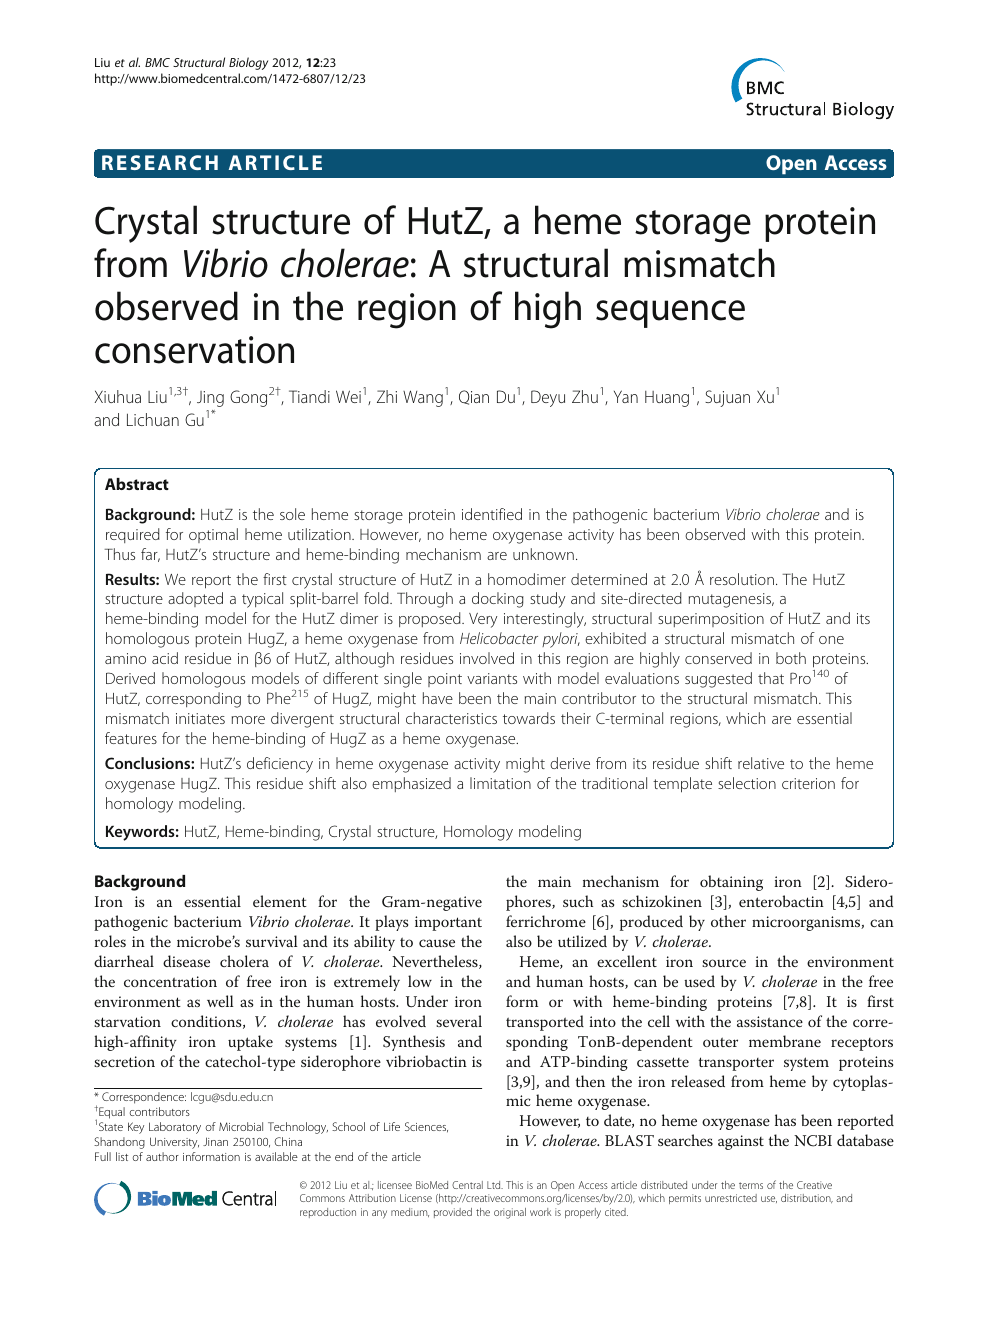 Crystal Structure Of Hutz A Heme Storage Protein From Vibrio Cholerae A Structural Mismatch Observed In The Region Of High Sequence Conservation Topic Of Research Paper In Biological Sciences Download Scholarly